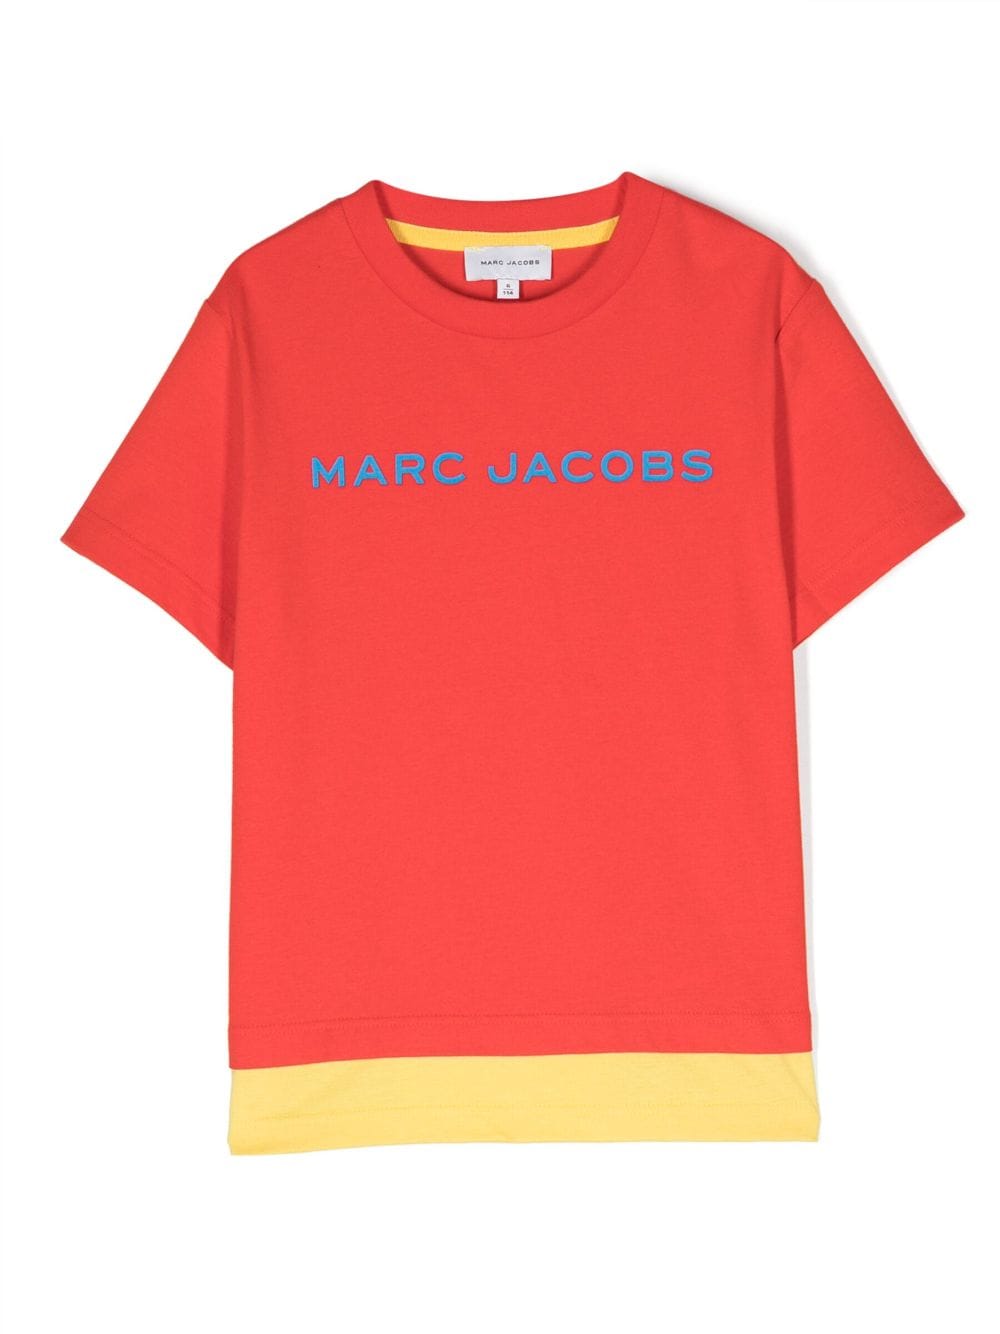 Red with contrasting panels cotton jersey boy MARC JACOBS t-shirt